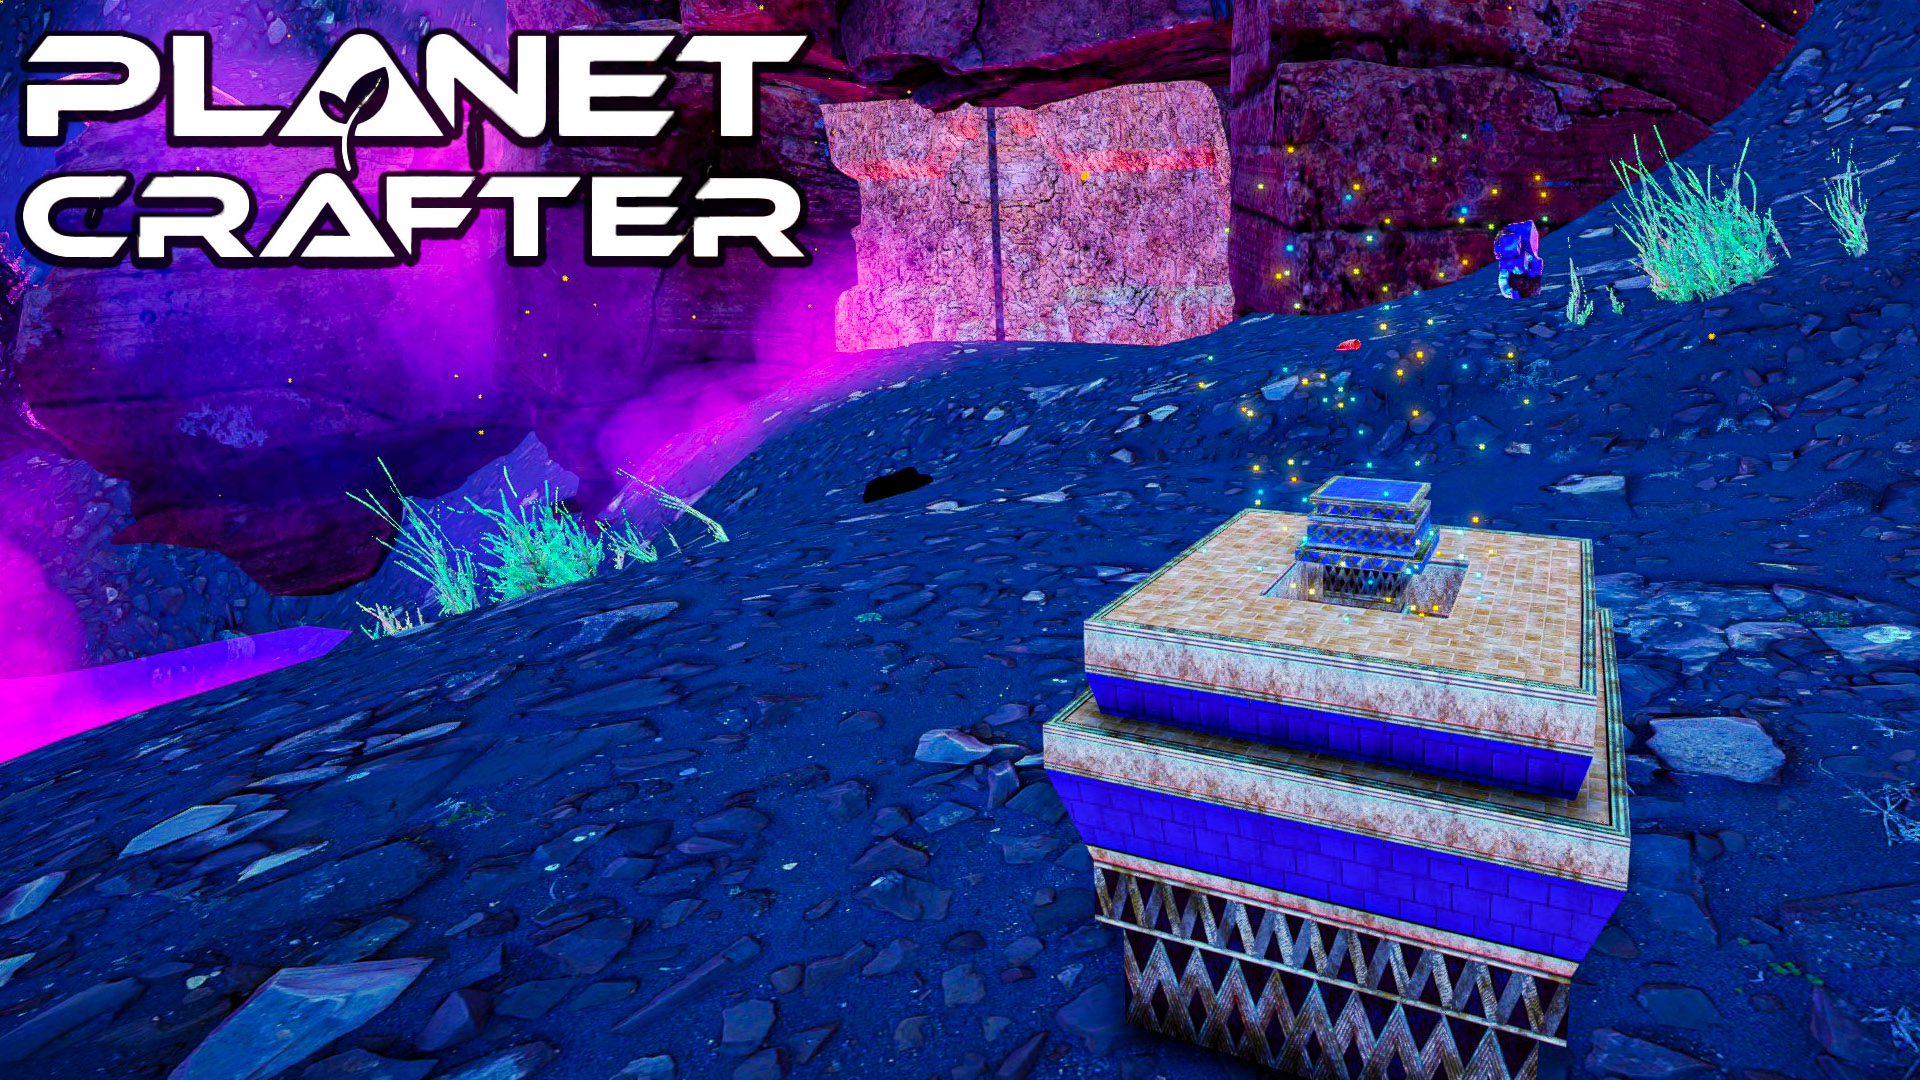 Planet Crafter биомы. Planet Crafter постройки. Planet Crafter рыбы. Planet Crafter водопад.